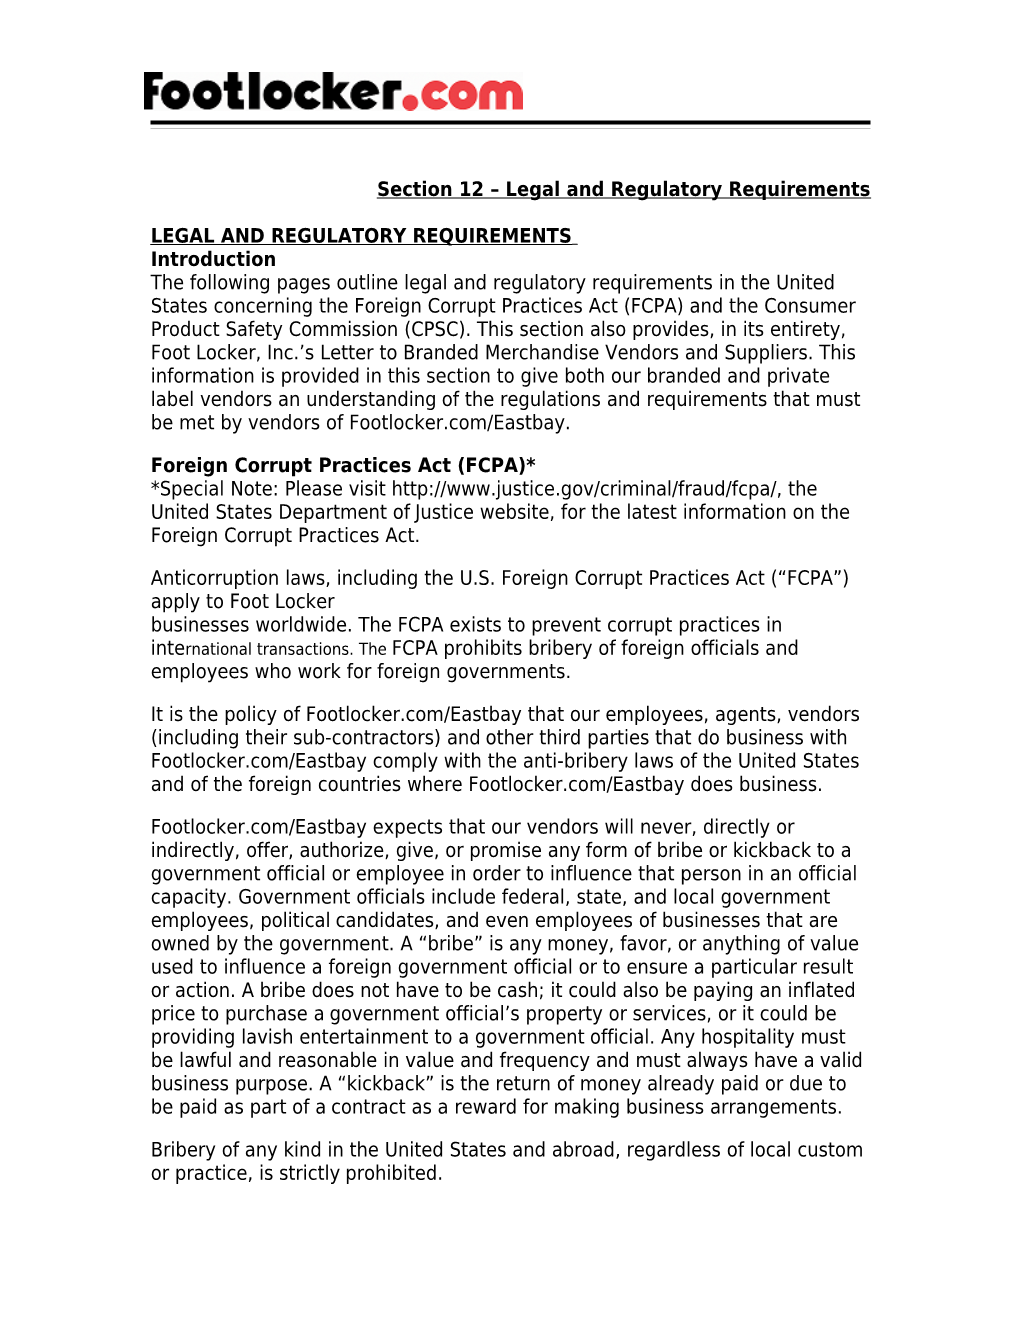 Section 12 Legal and Regulatory Requirements